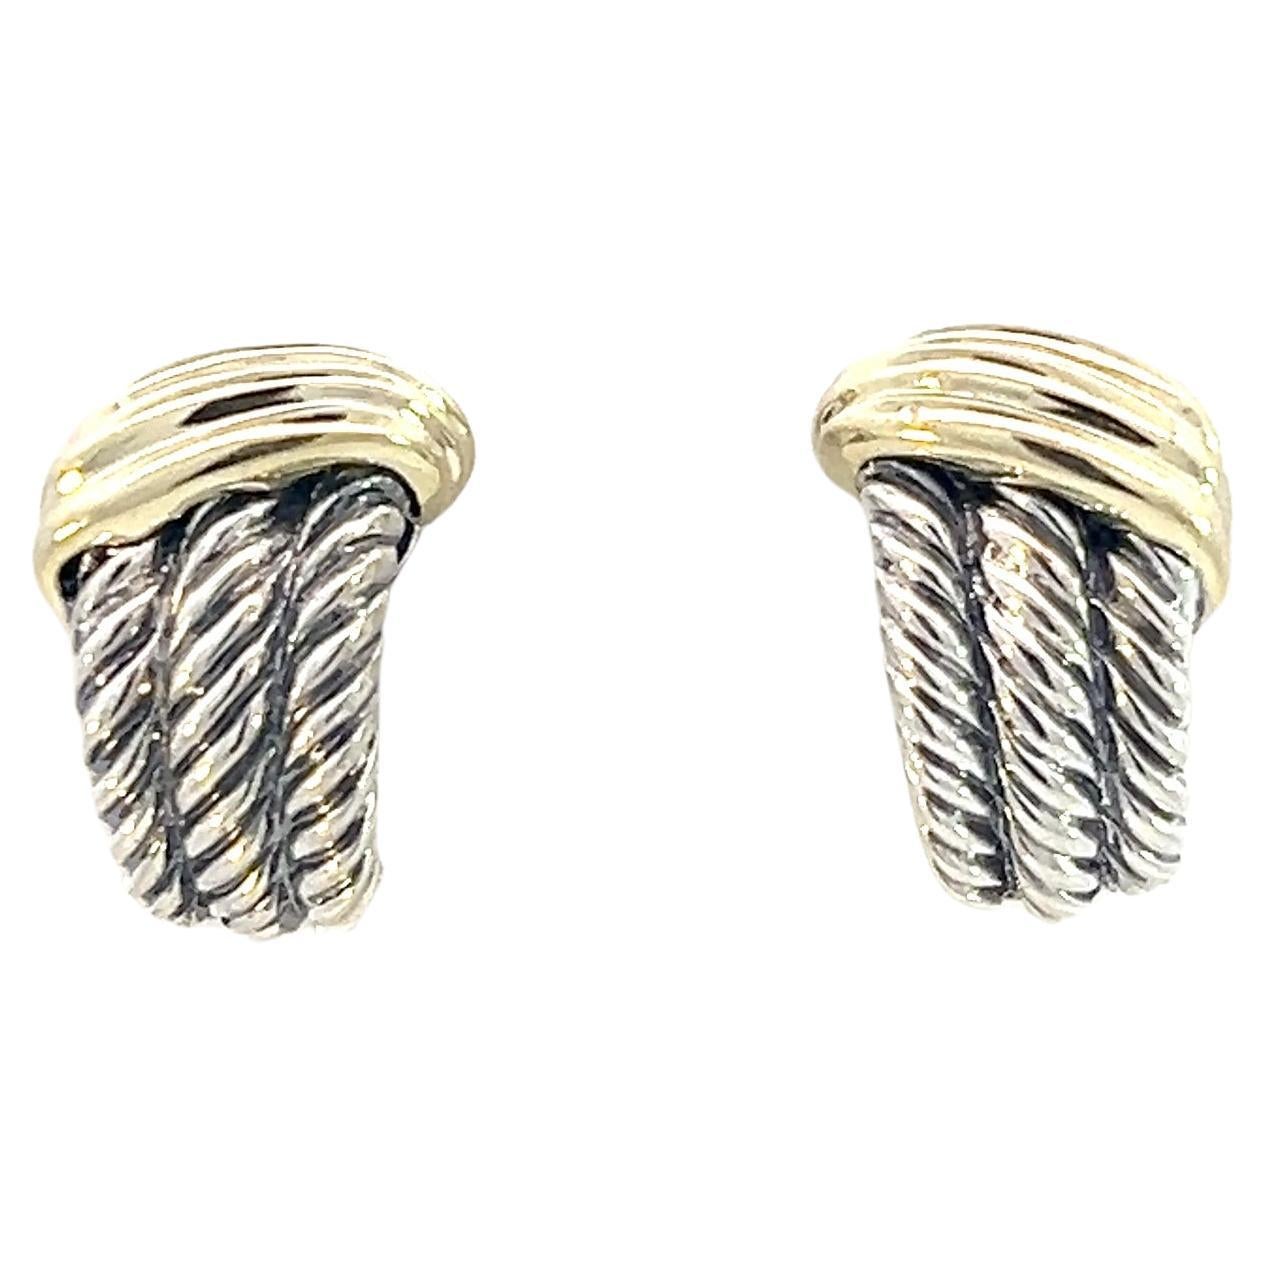 David Yurman Authentic Estate Cable Rope Clips Earrings 14k + Silver